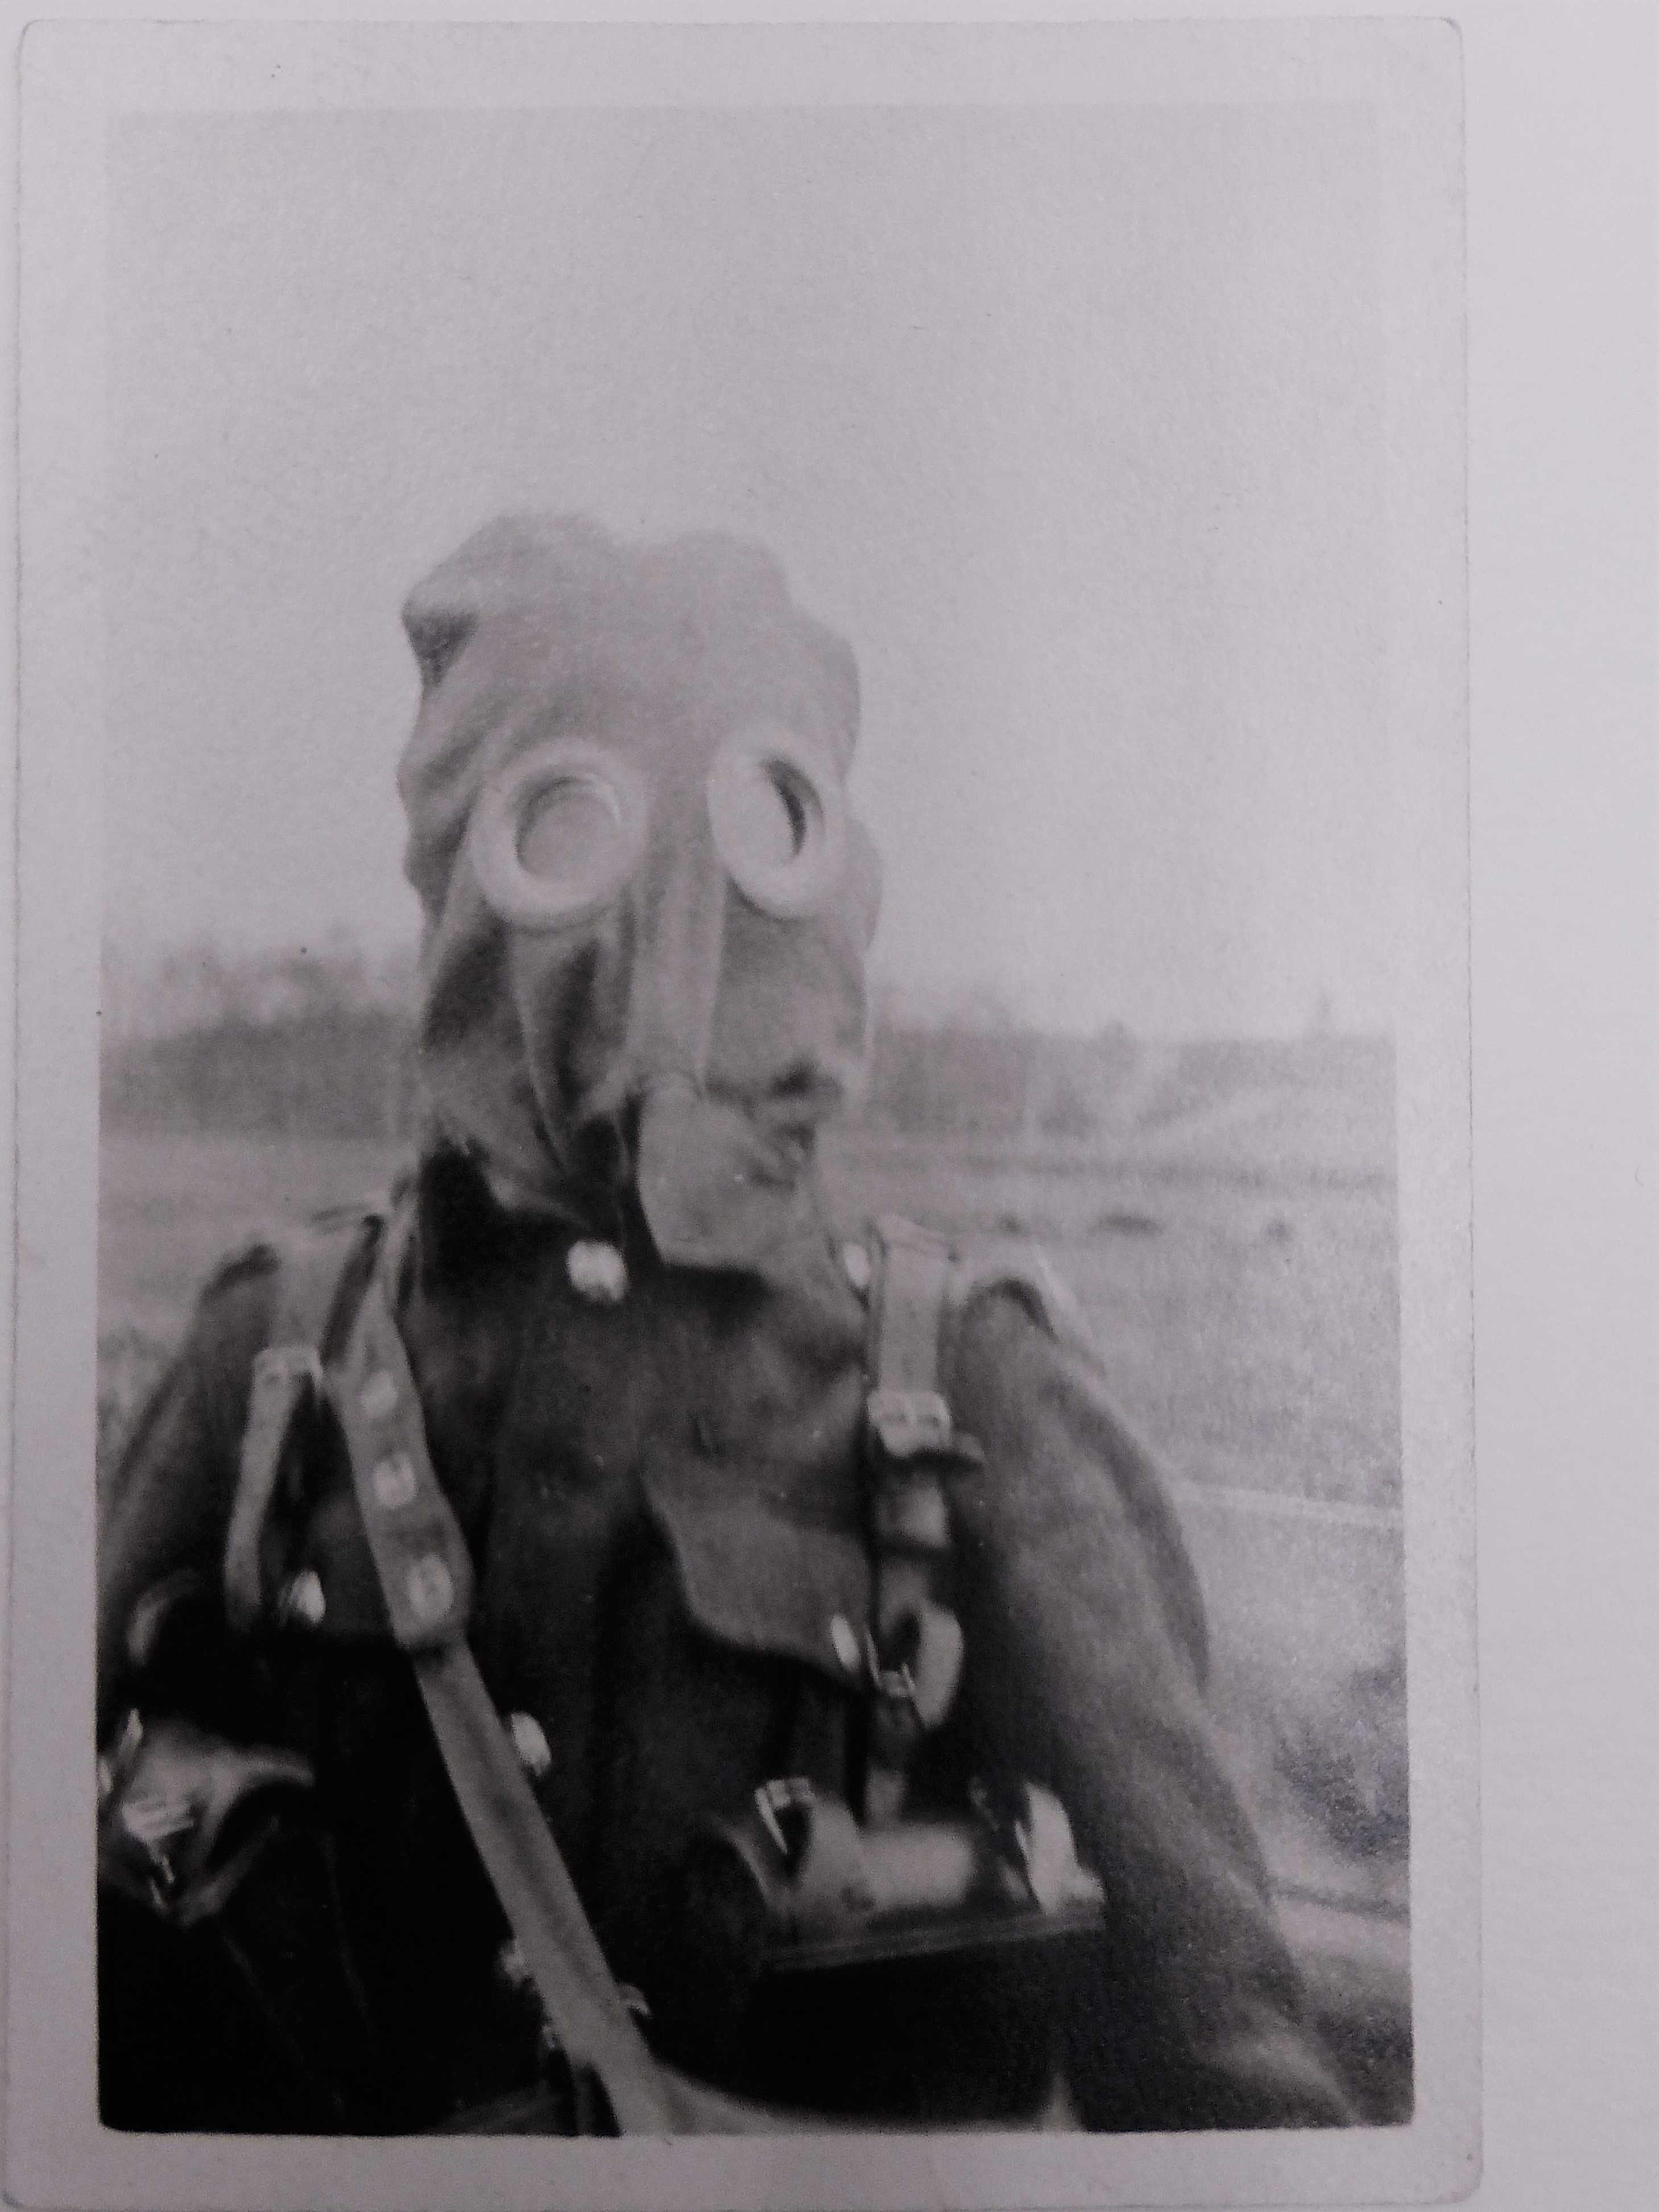 A black and white image of a soldier in military uniform wearing a primitive gas mask. The mask resembles a sack with two glass circles over top of his eyes.